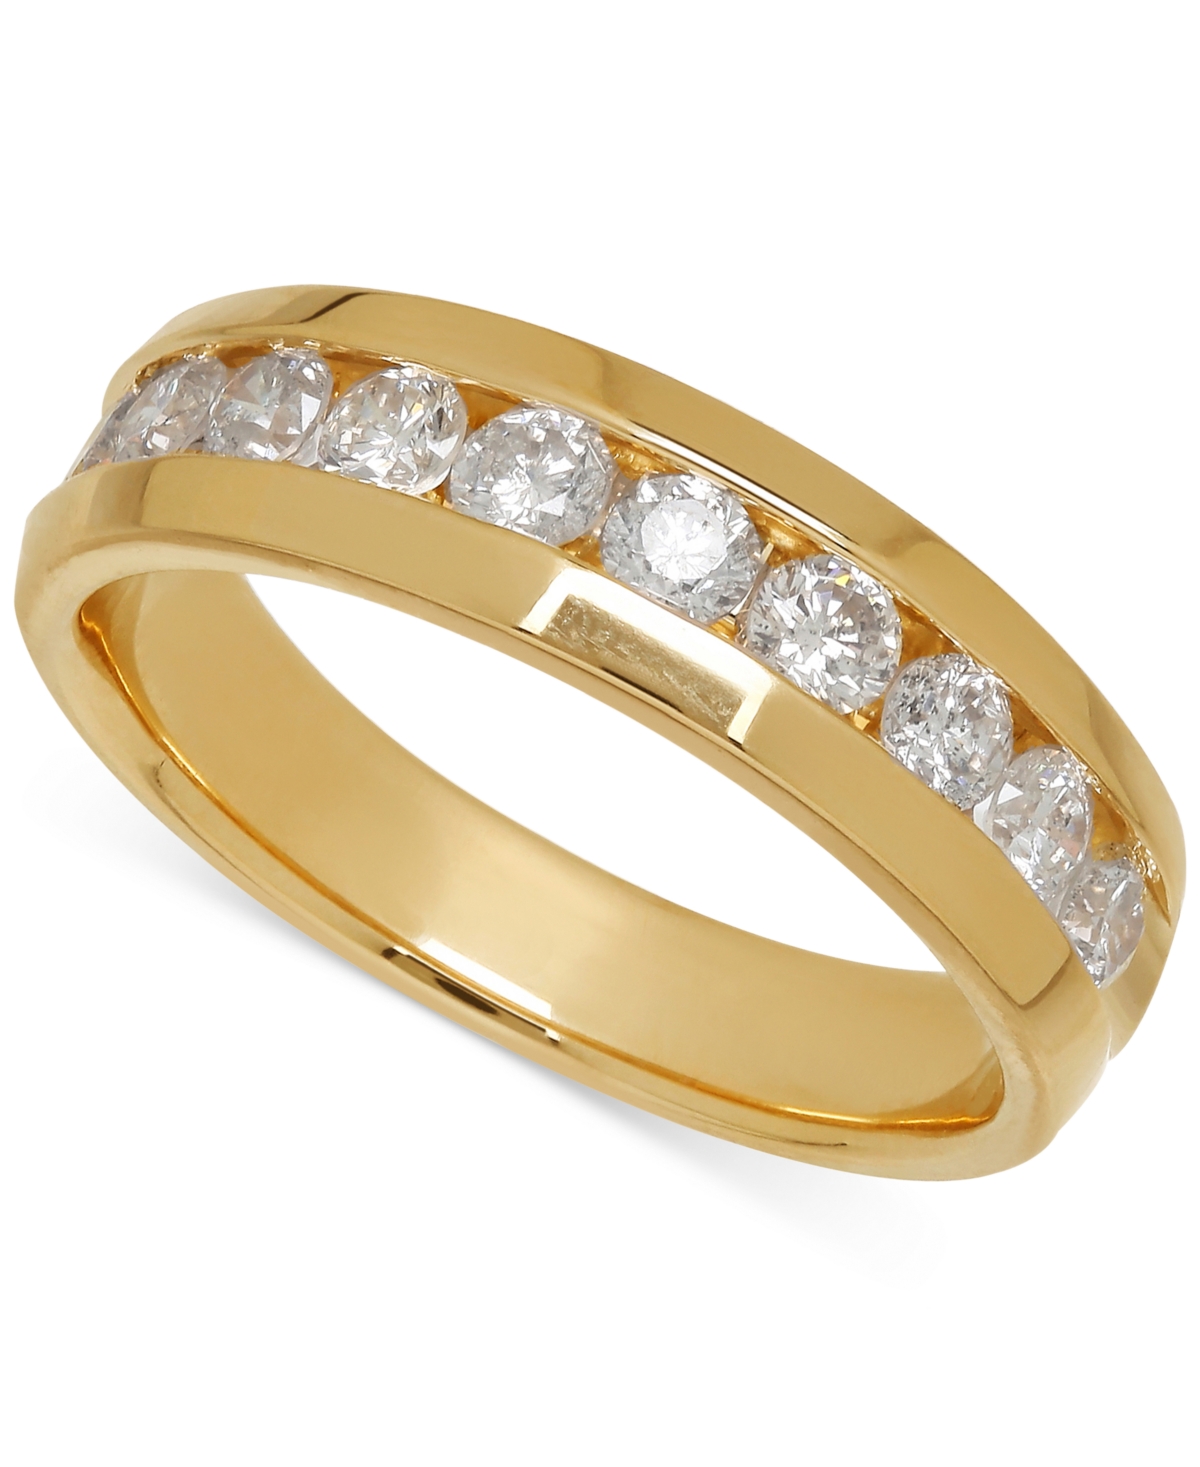 MACY'S MEN'S DIAMOND BAND (1 CT. T.W.) IN 14K WHITE GOLD (ALSO IN 14K YELLOW GOLD)